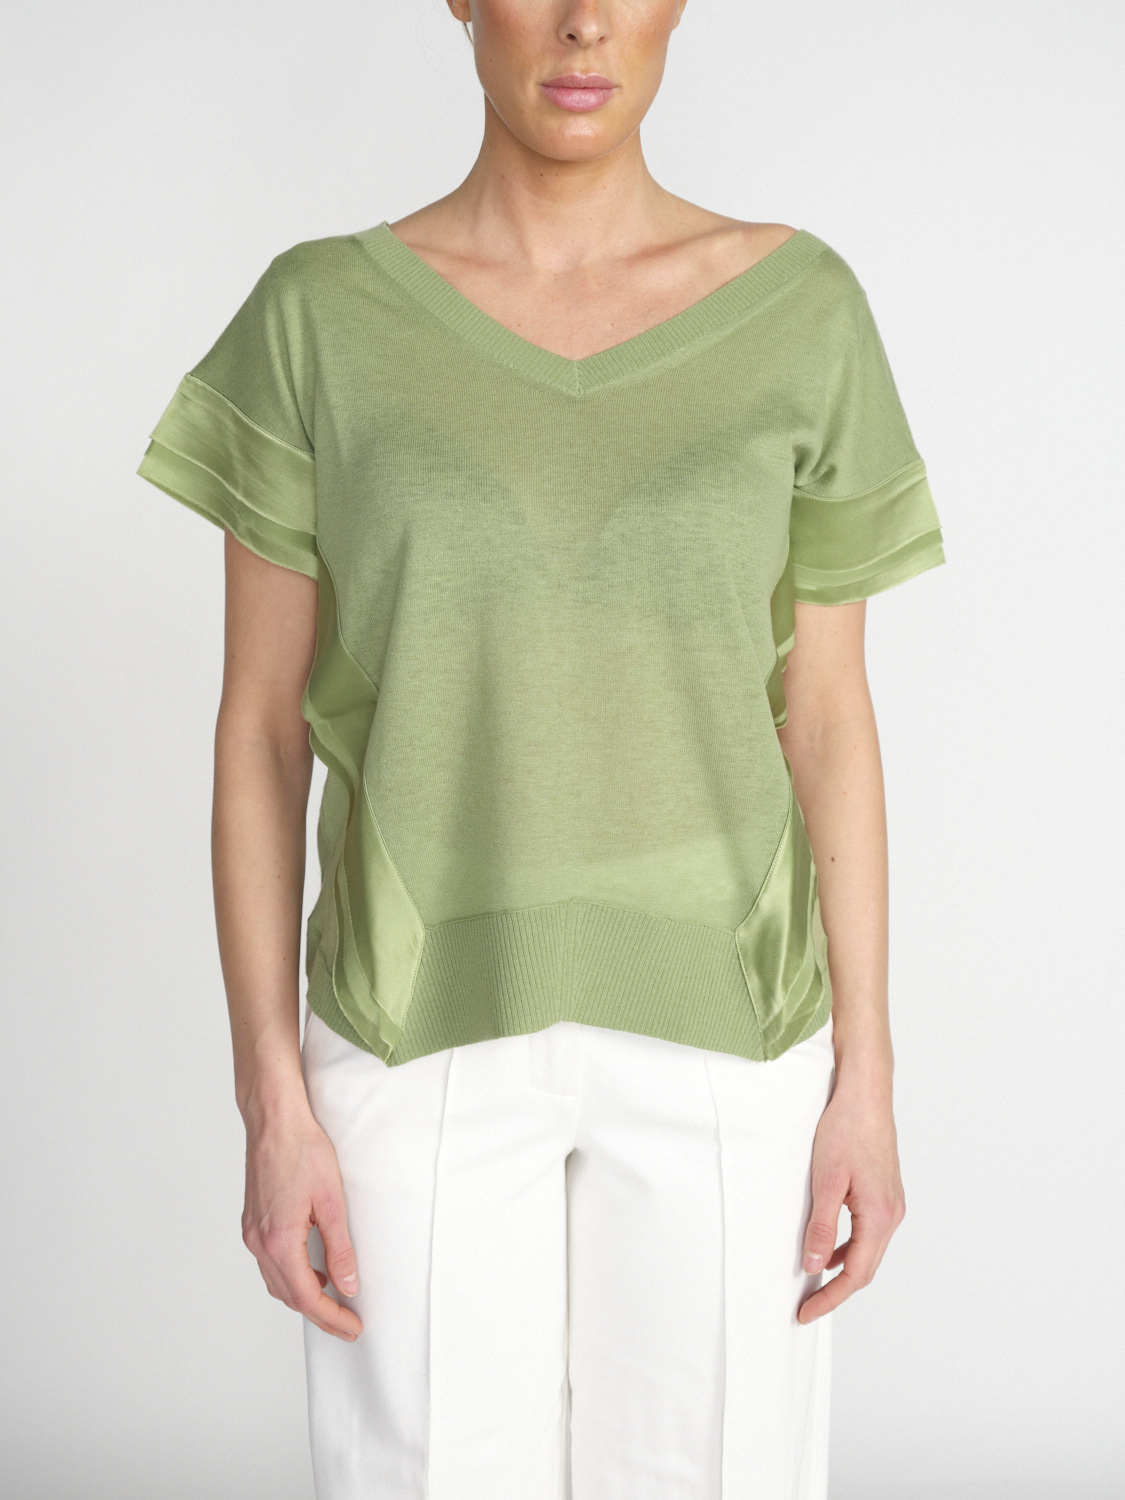 Dorothee Schumacher Delicate Statements – Oversized shirt made from a wool-cashmere mix  hellgrün XS